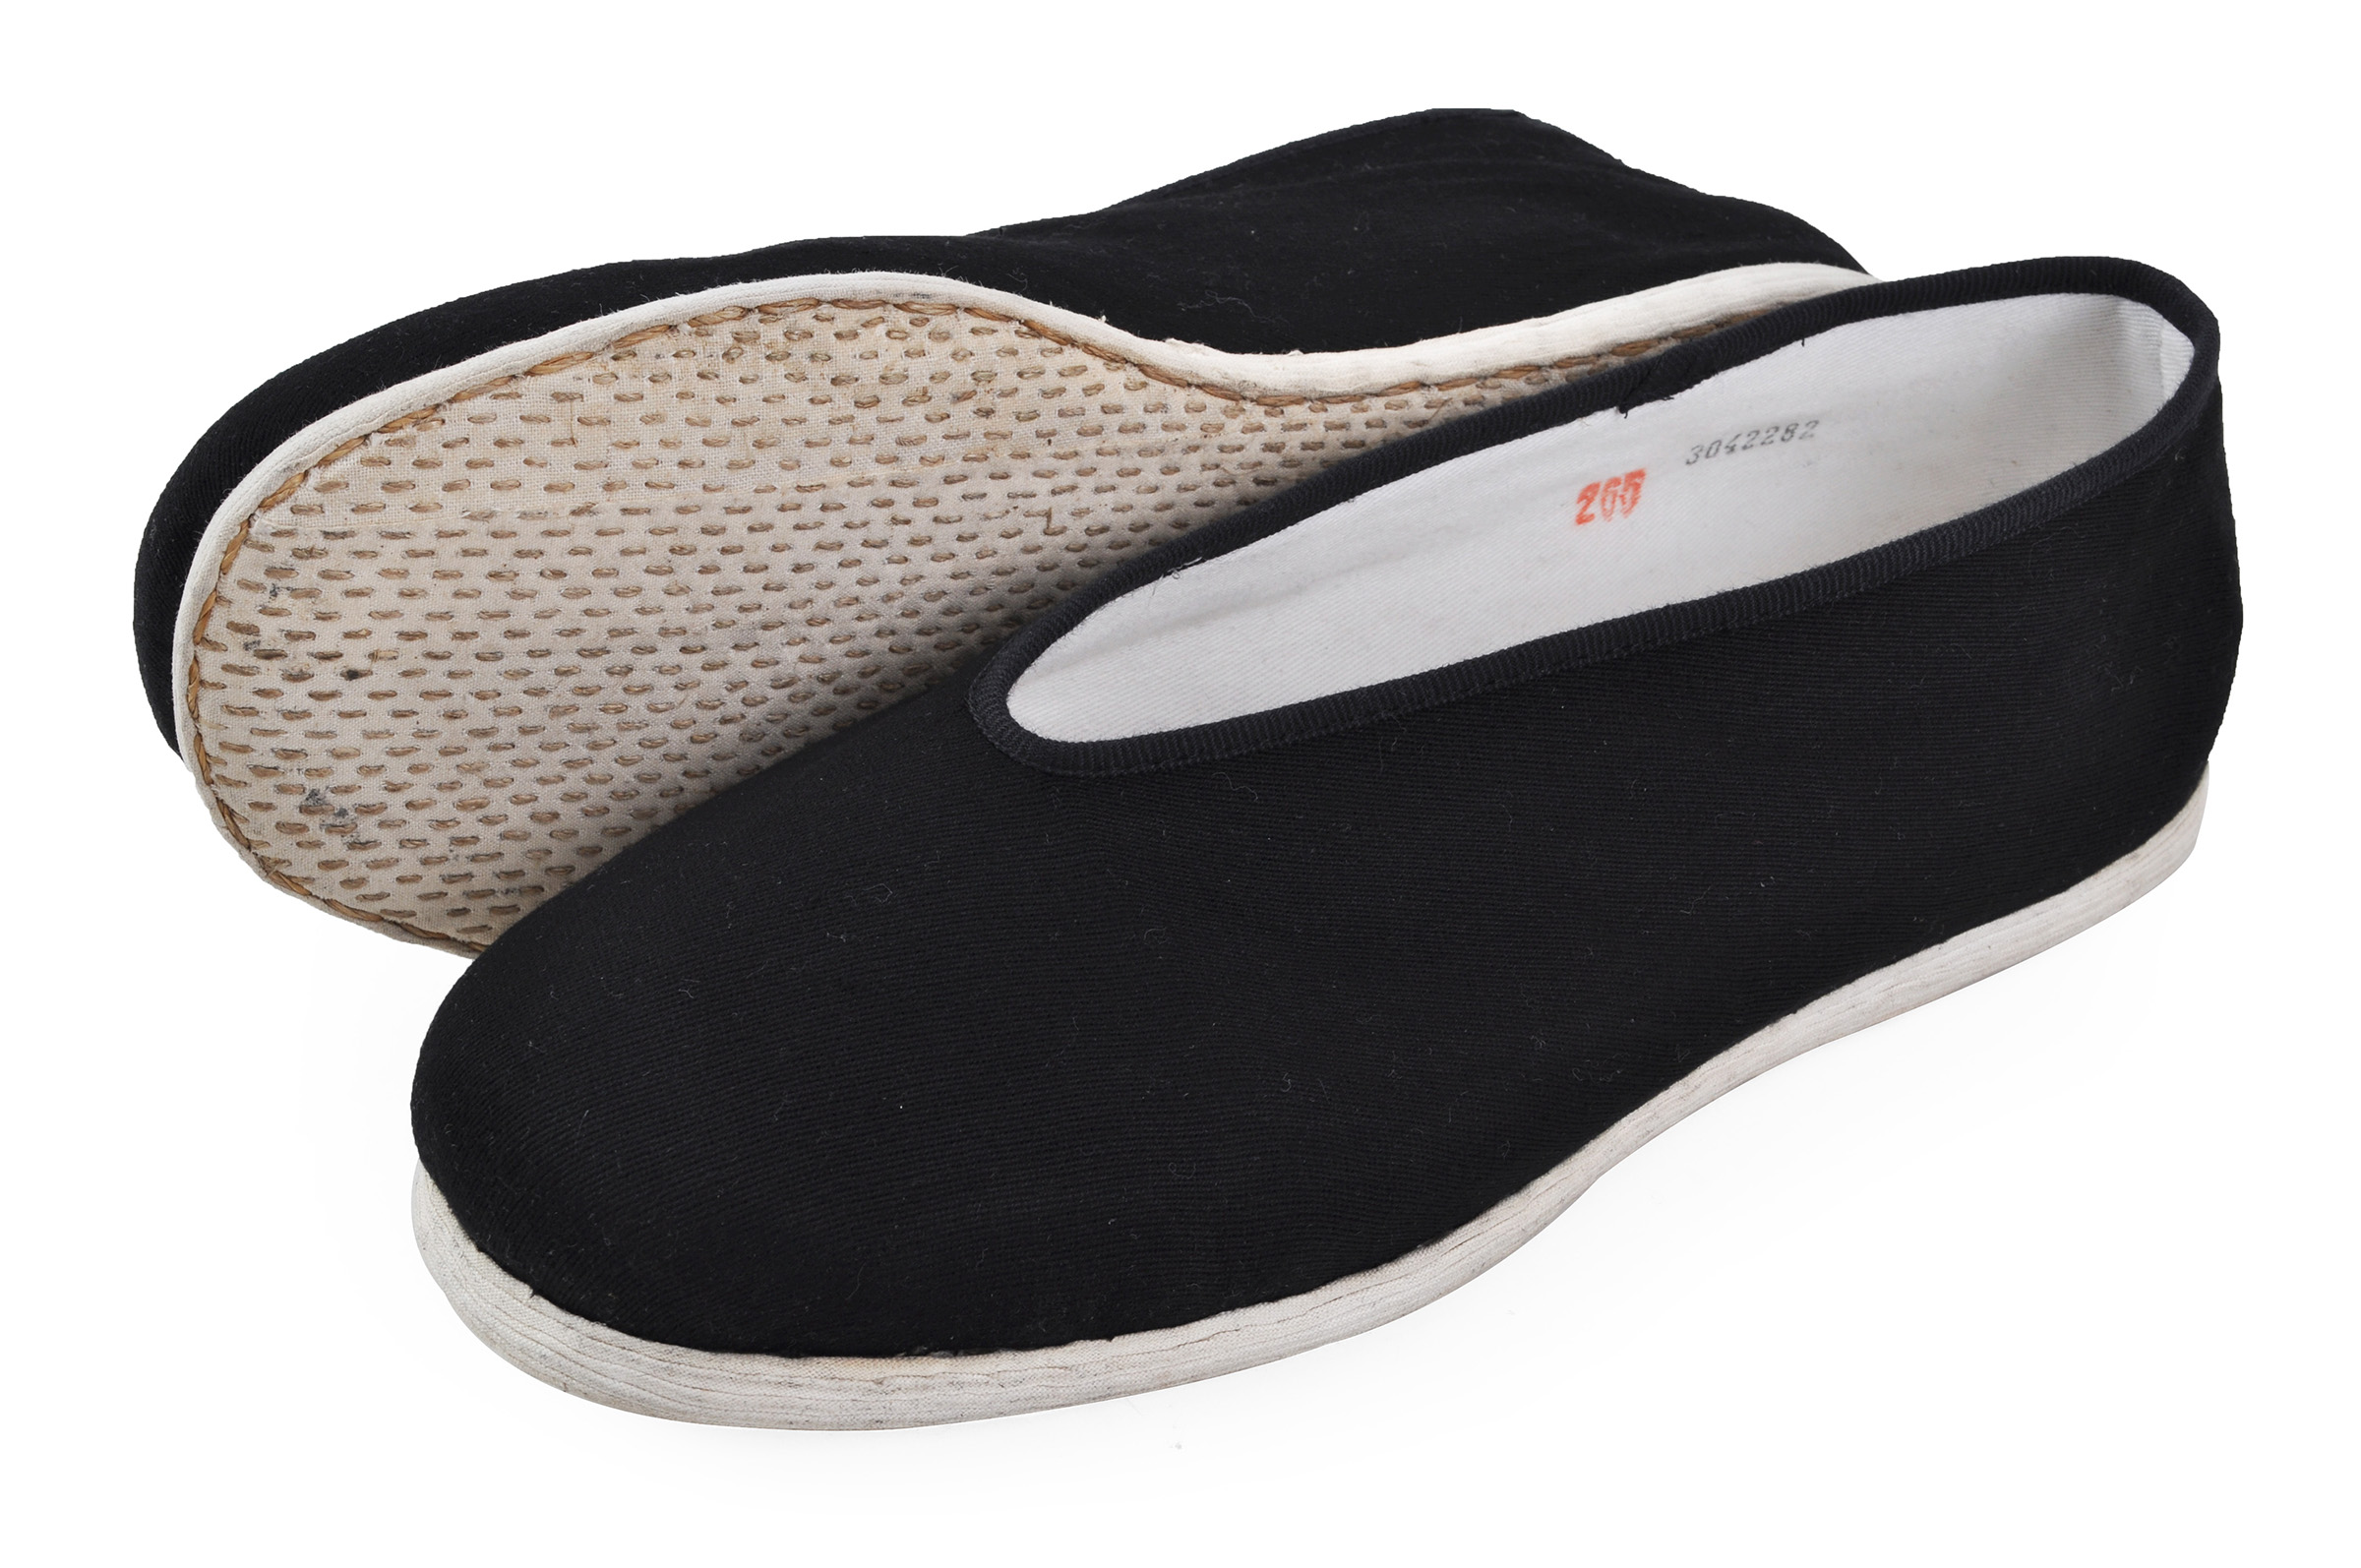 Homme Slip On Mocassin Kungfu broder Denim Colth plat Tai Ji Chaussures #comfy NEUF 